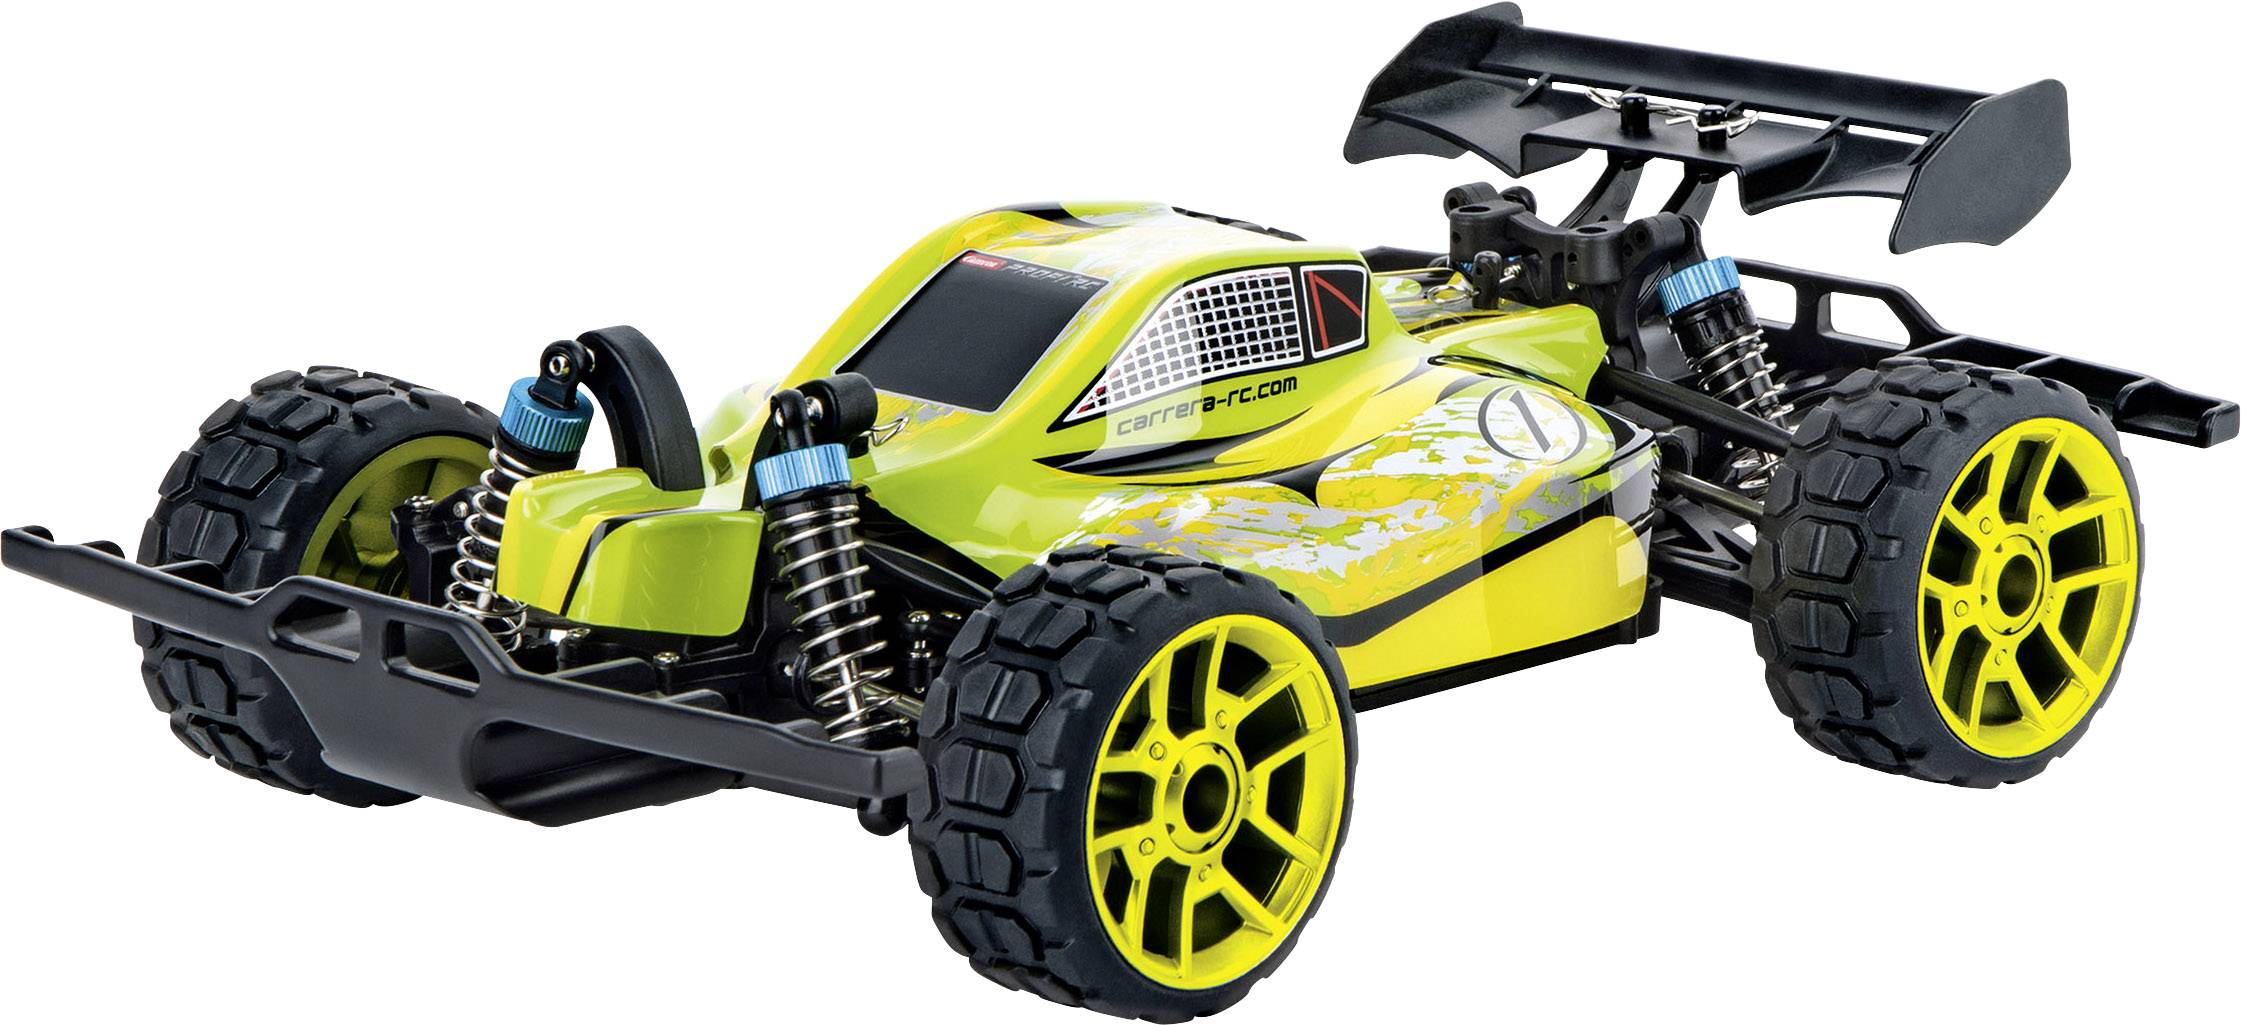 Buy Carrera RC 370183012 Lime Star 1:18 RC model car for beginners